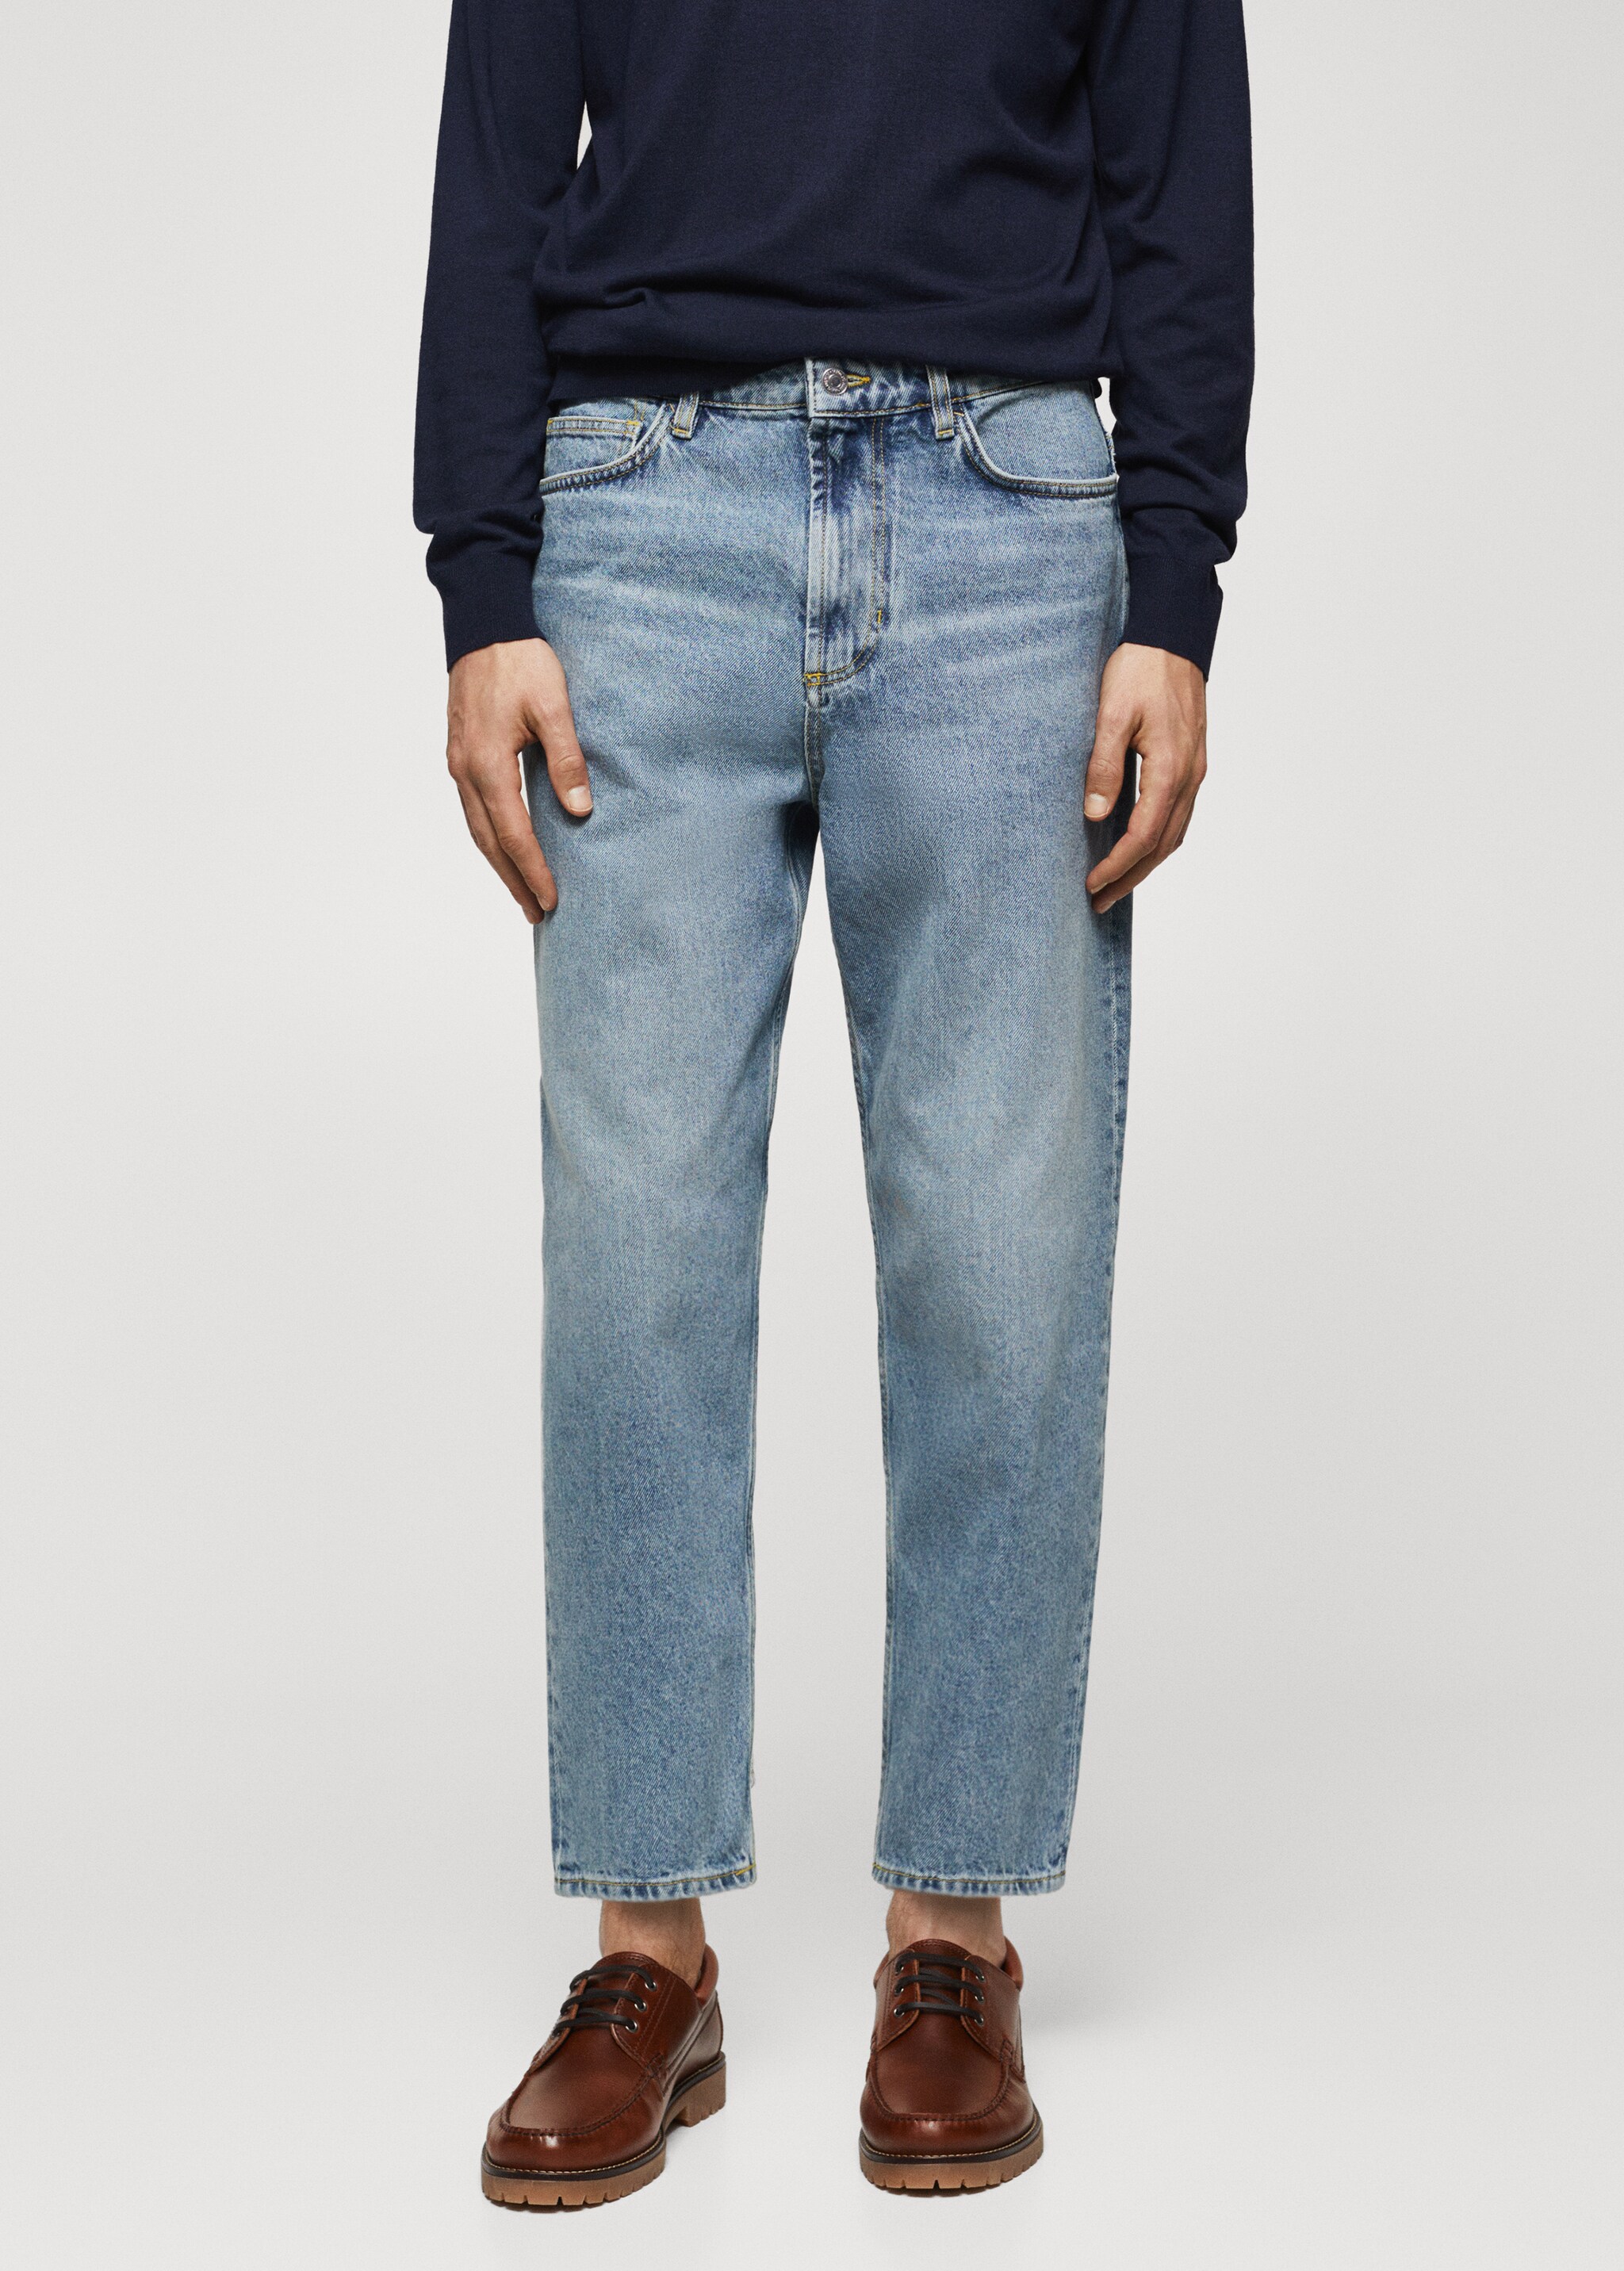 Tapered loose cropped jeans - Medium plane